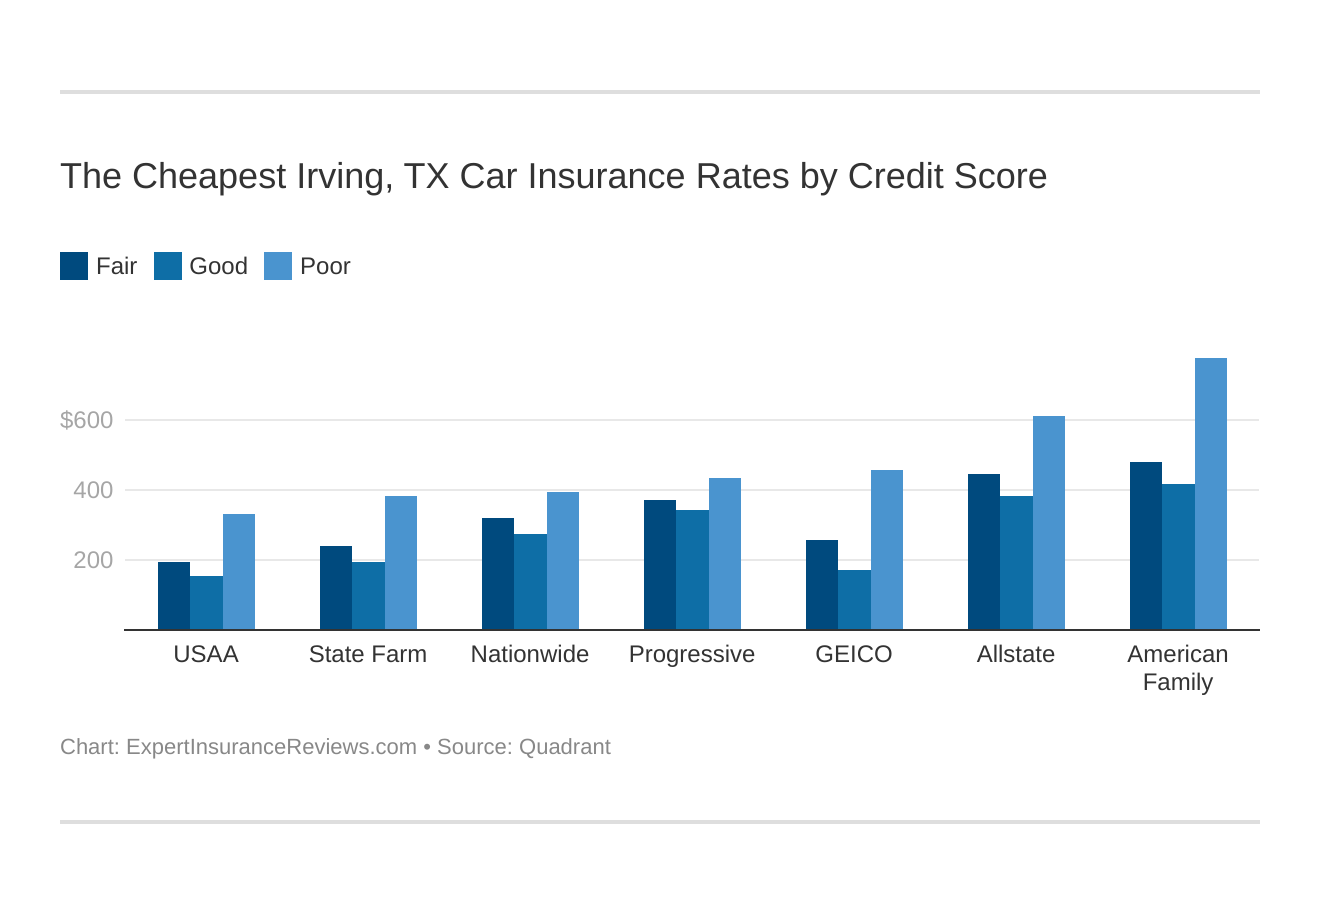 The Cheapest Irving, TX Car Insurance Rates by Credit Score